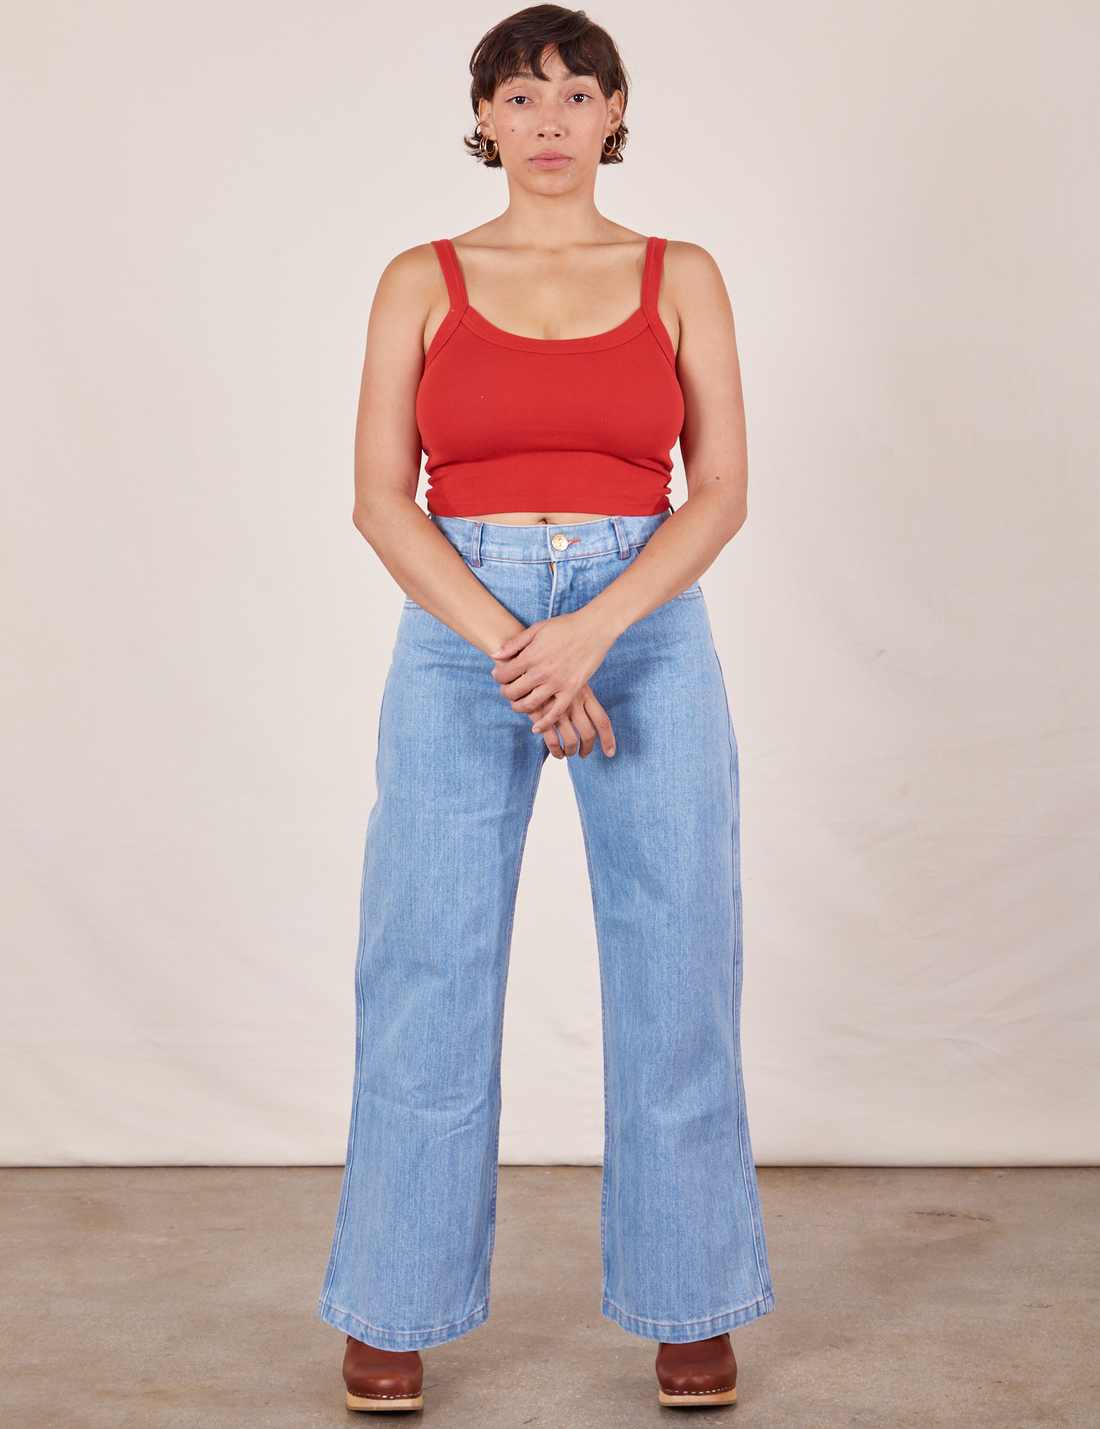 Tiara is wearing Cropped Cami in Mustang Red and light wash Sailor Jeans